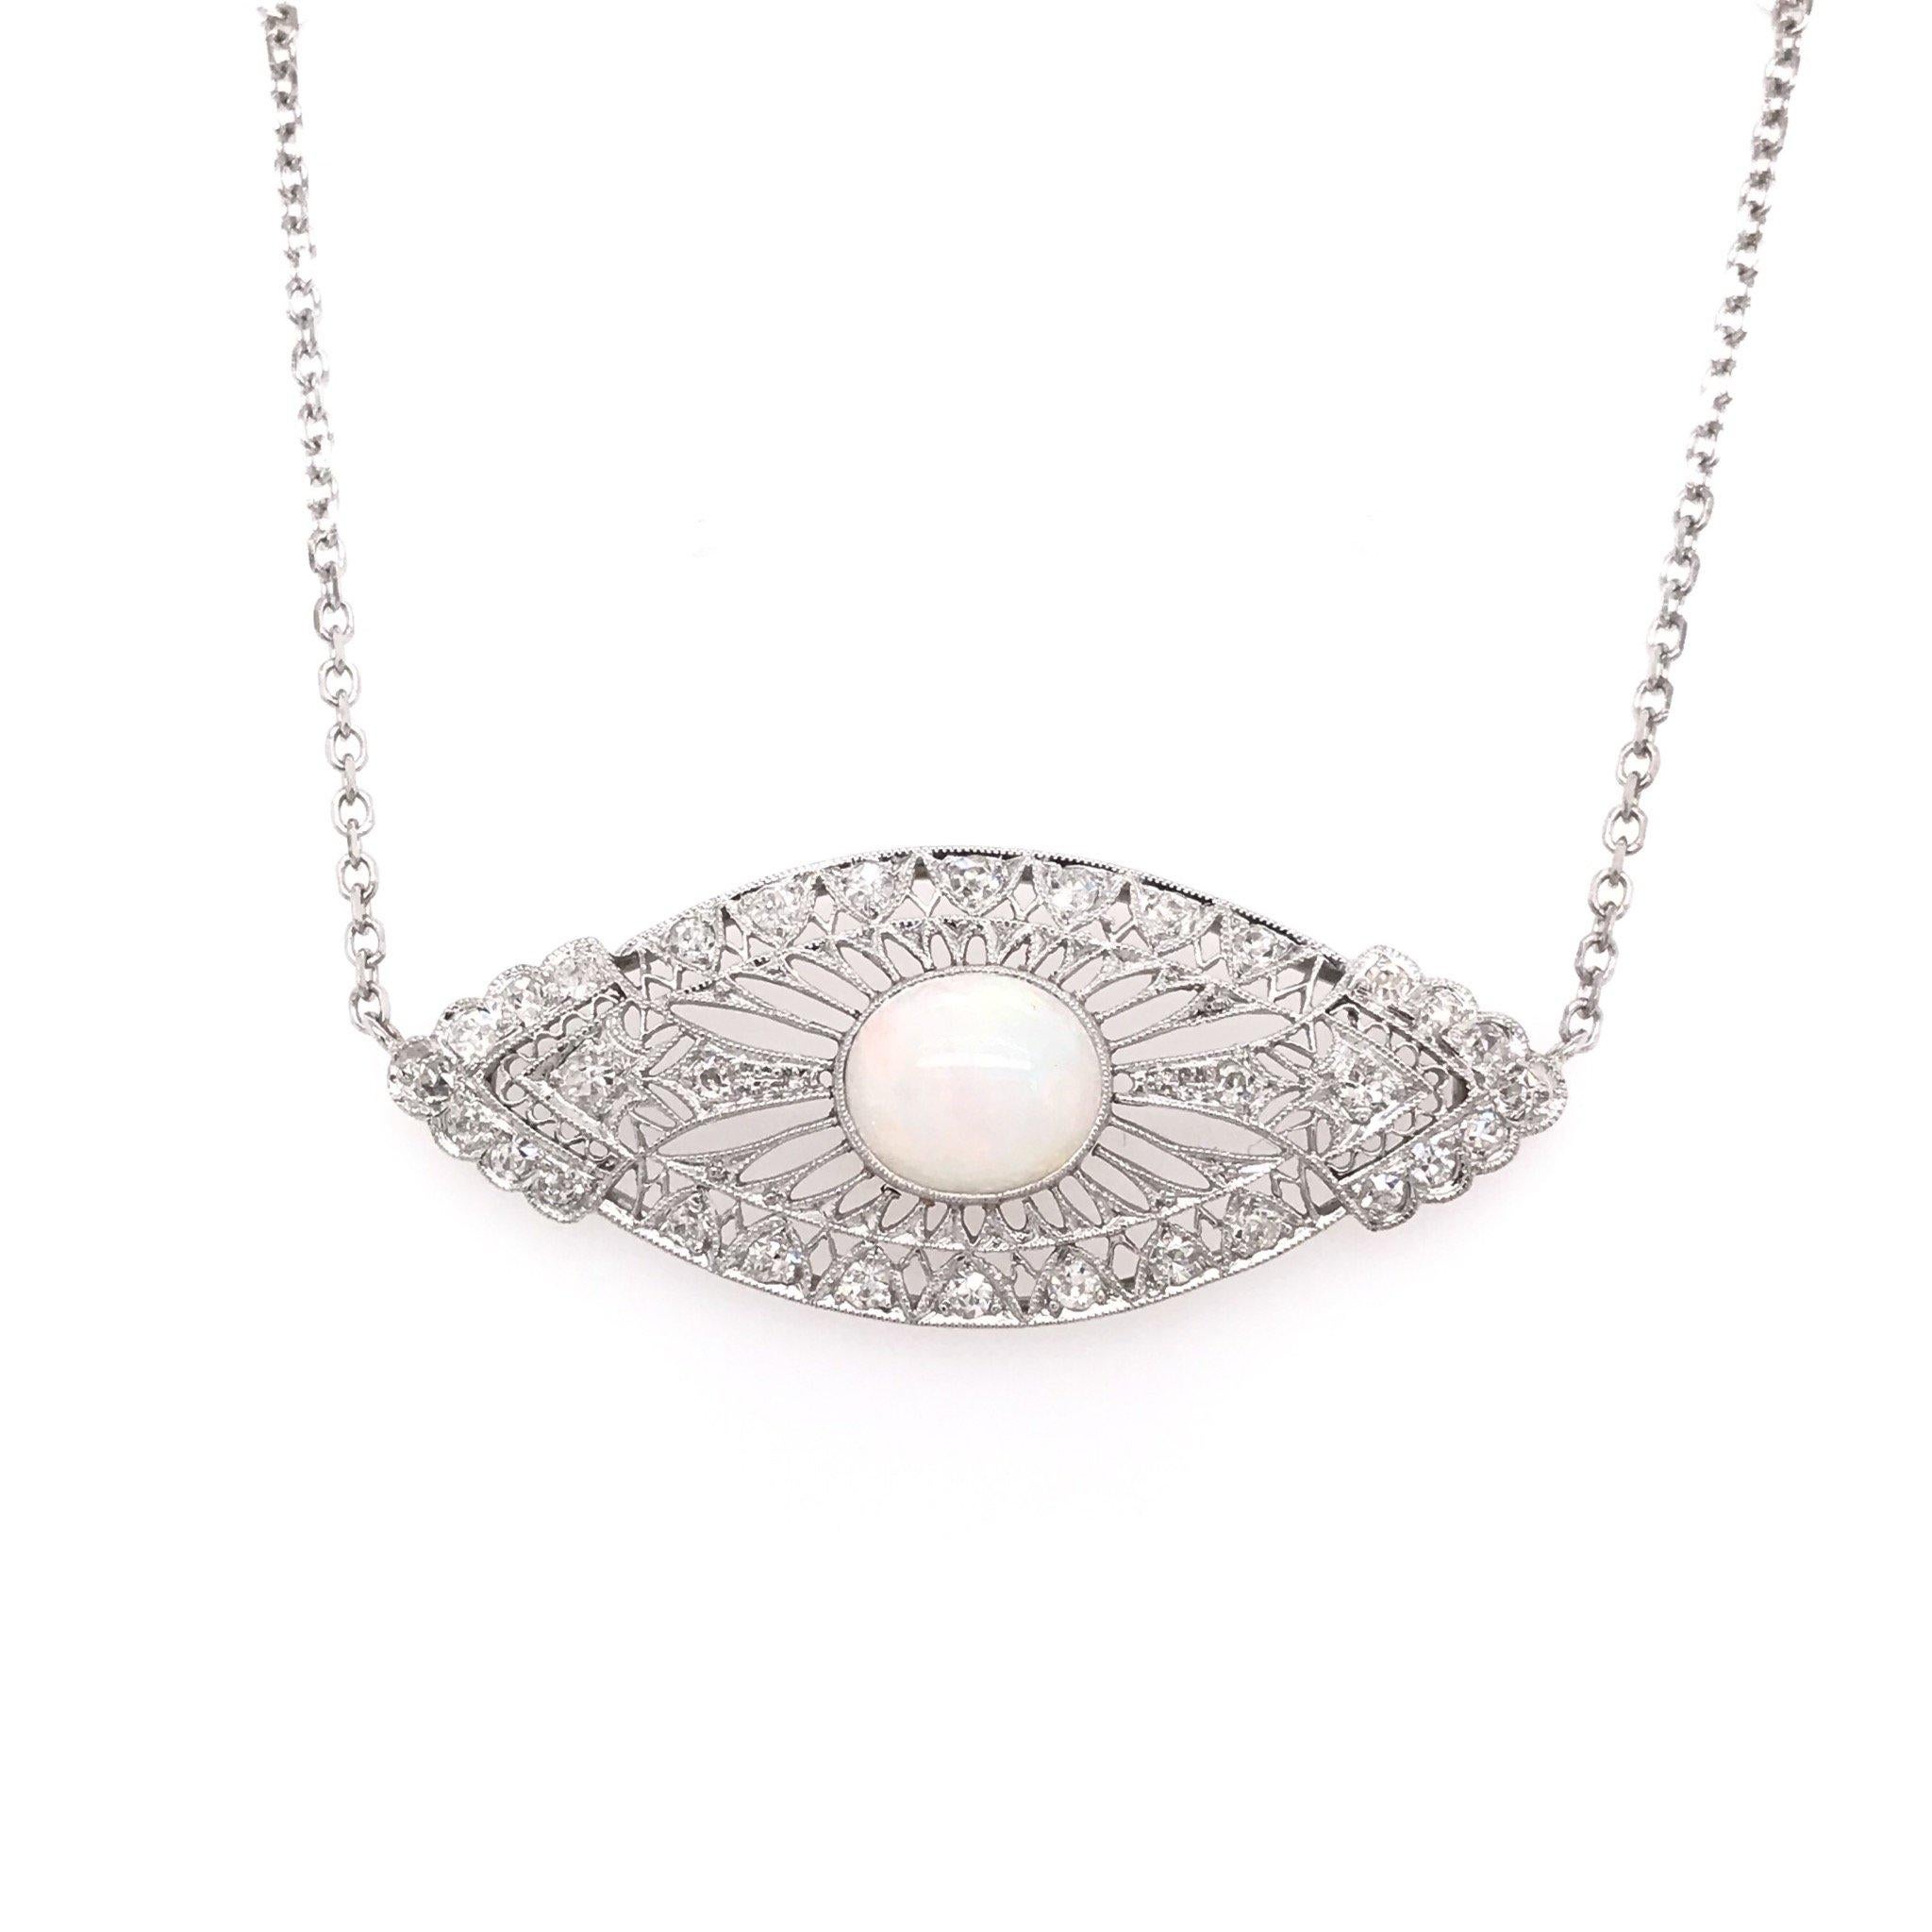 This piece is an antique revision made from reclaimed antique materials. This necklace was originally an antique brooch handcrafted sometime during the Art Nouveau design period ( 1890 -1910 ). The platinum pendant features 32 sparkling diamond